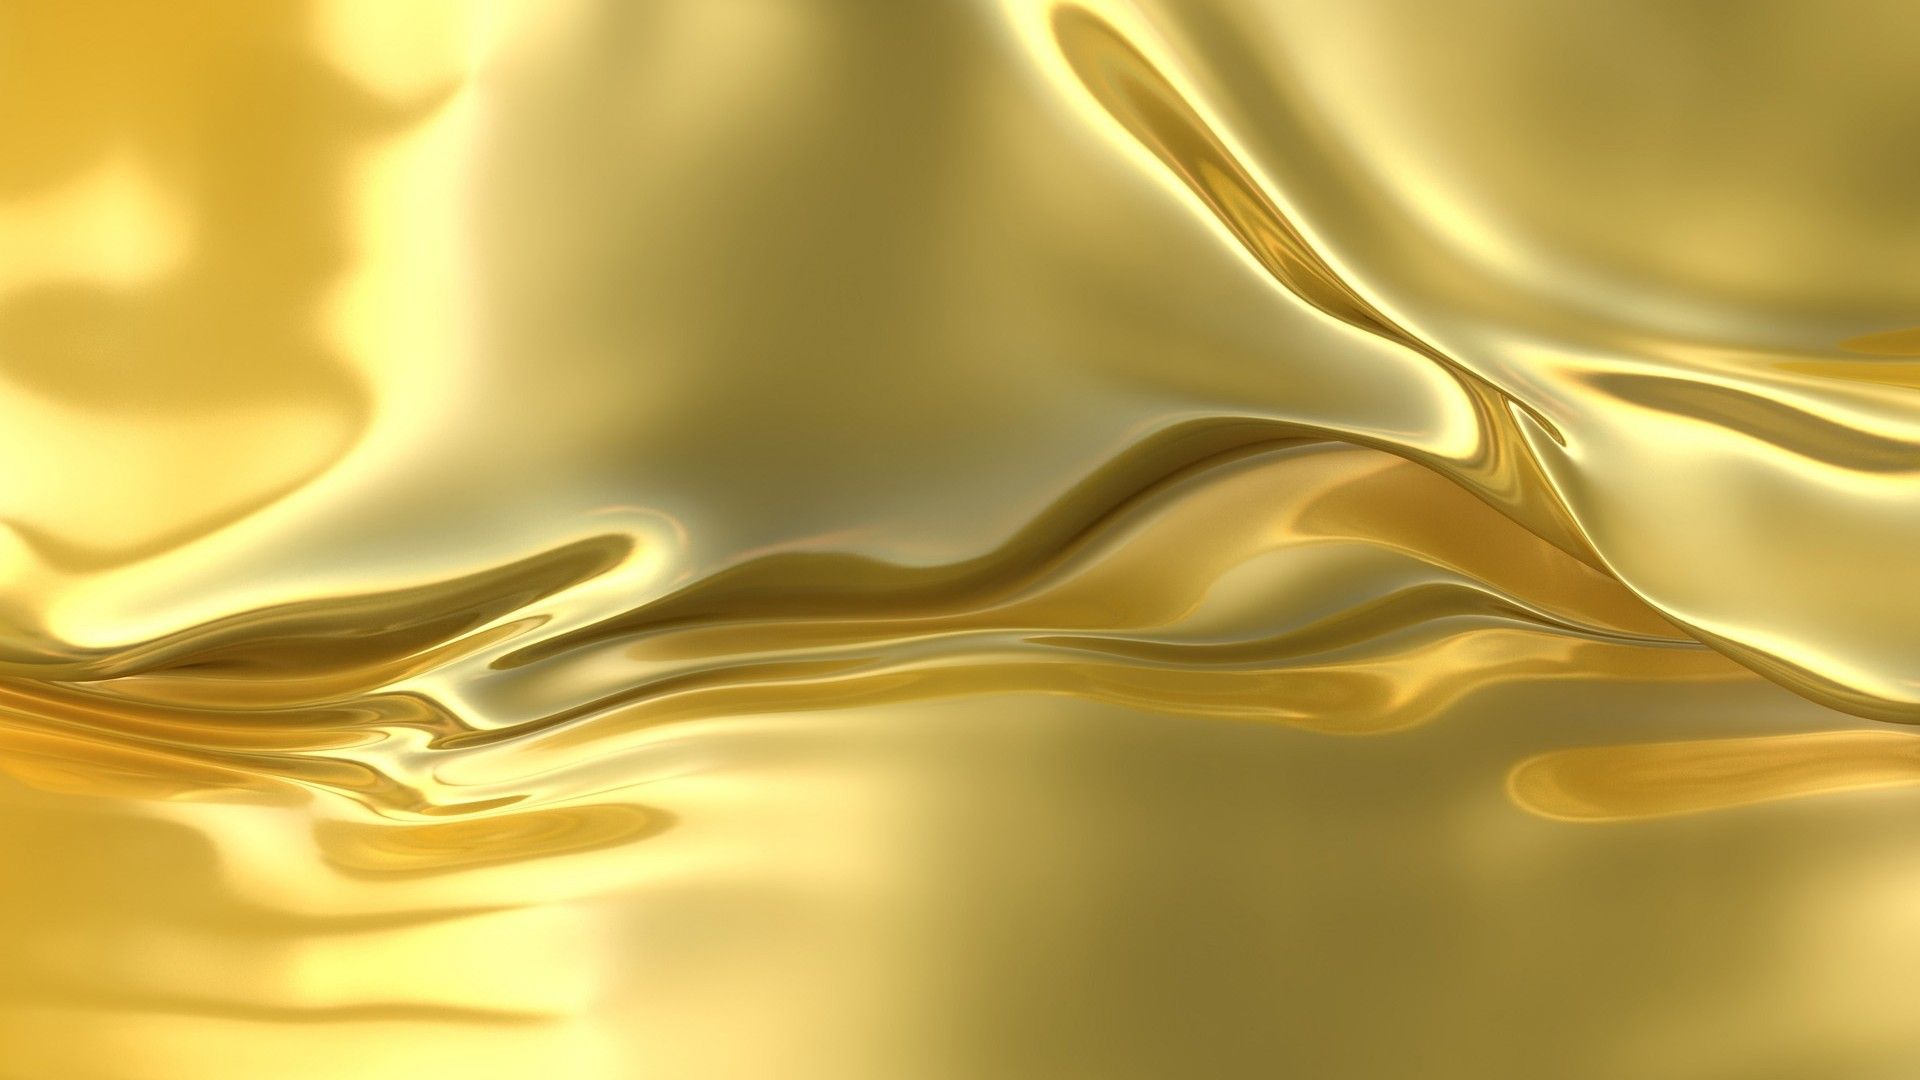 Gold HD Background. Gold abstract wallpaper